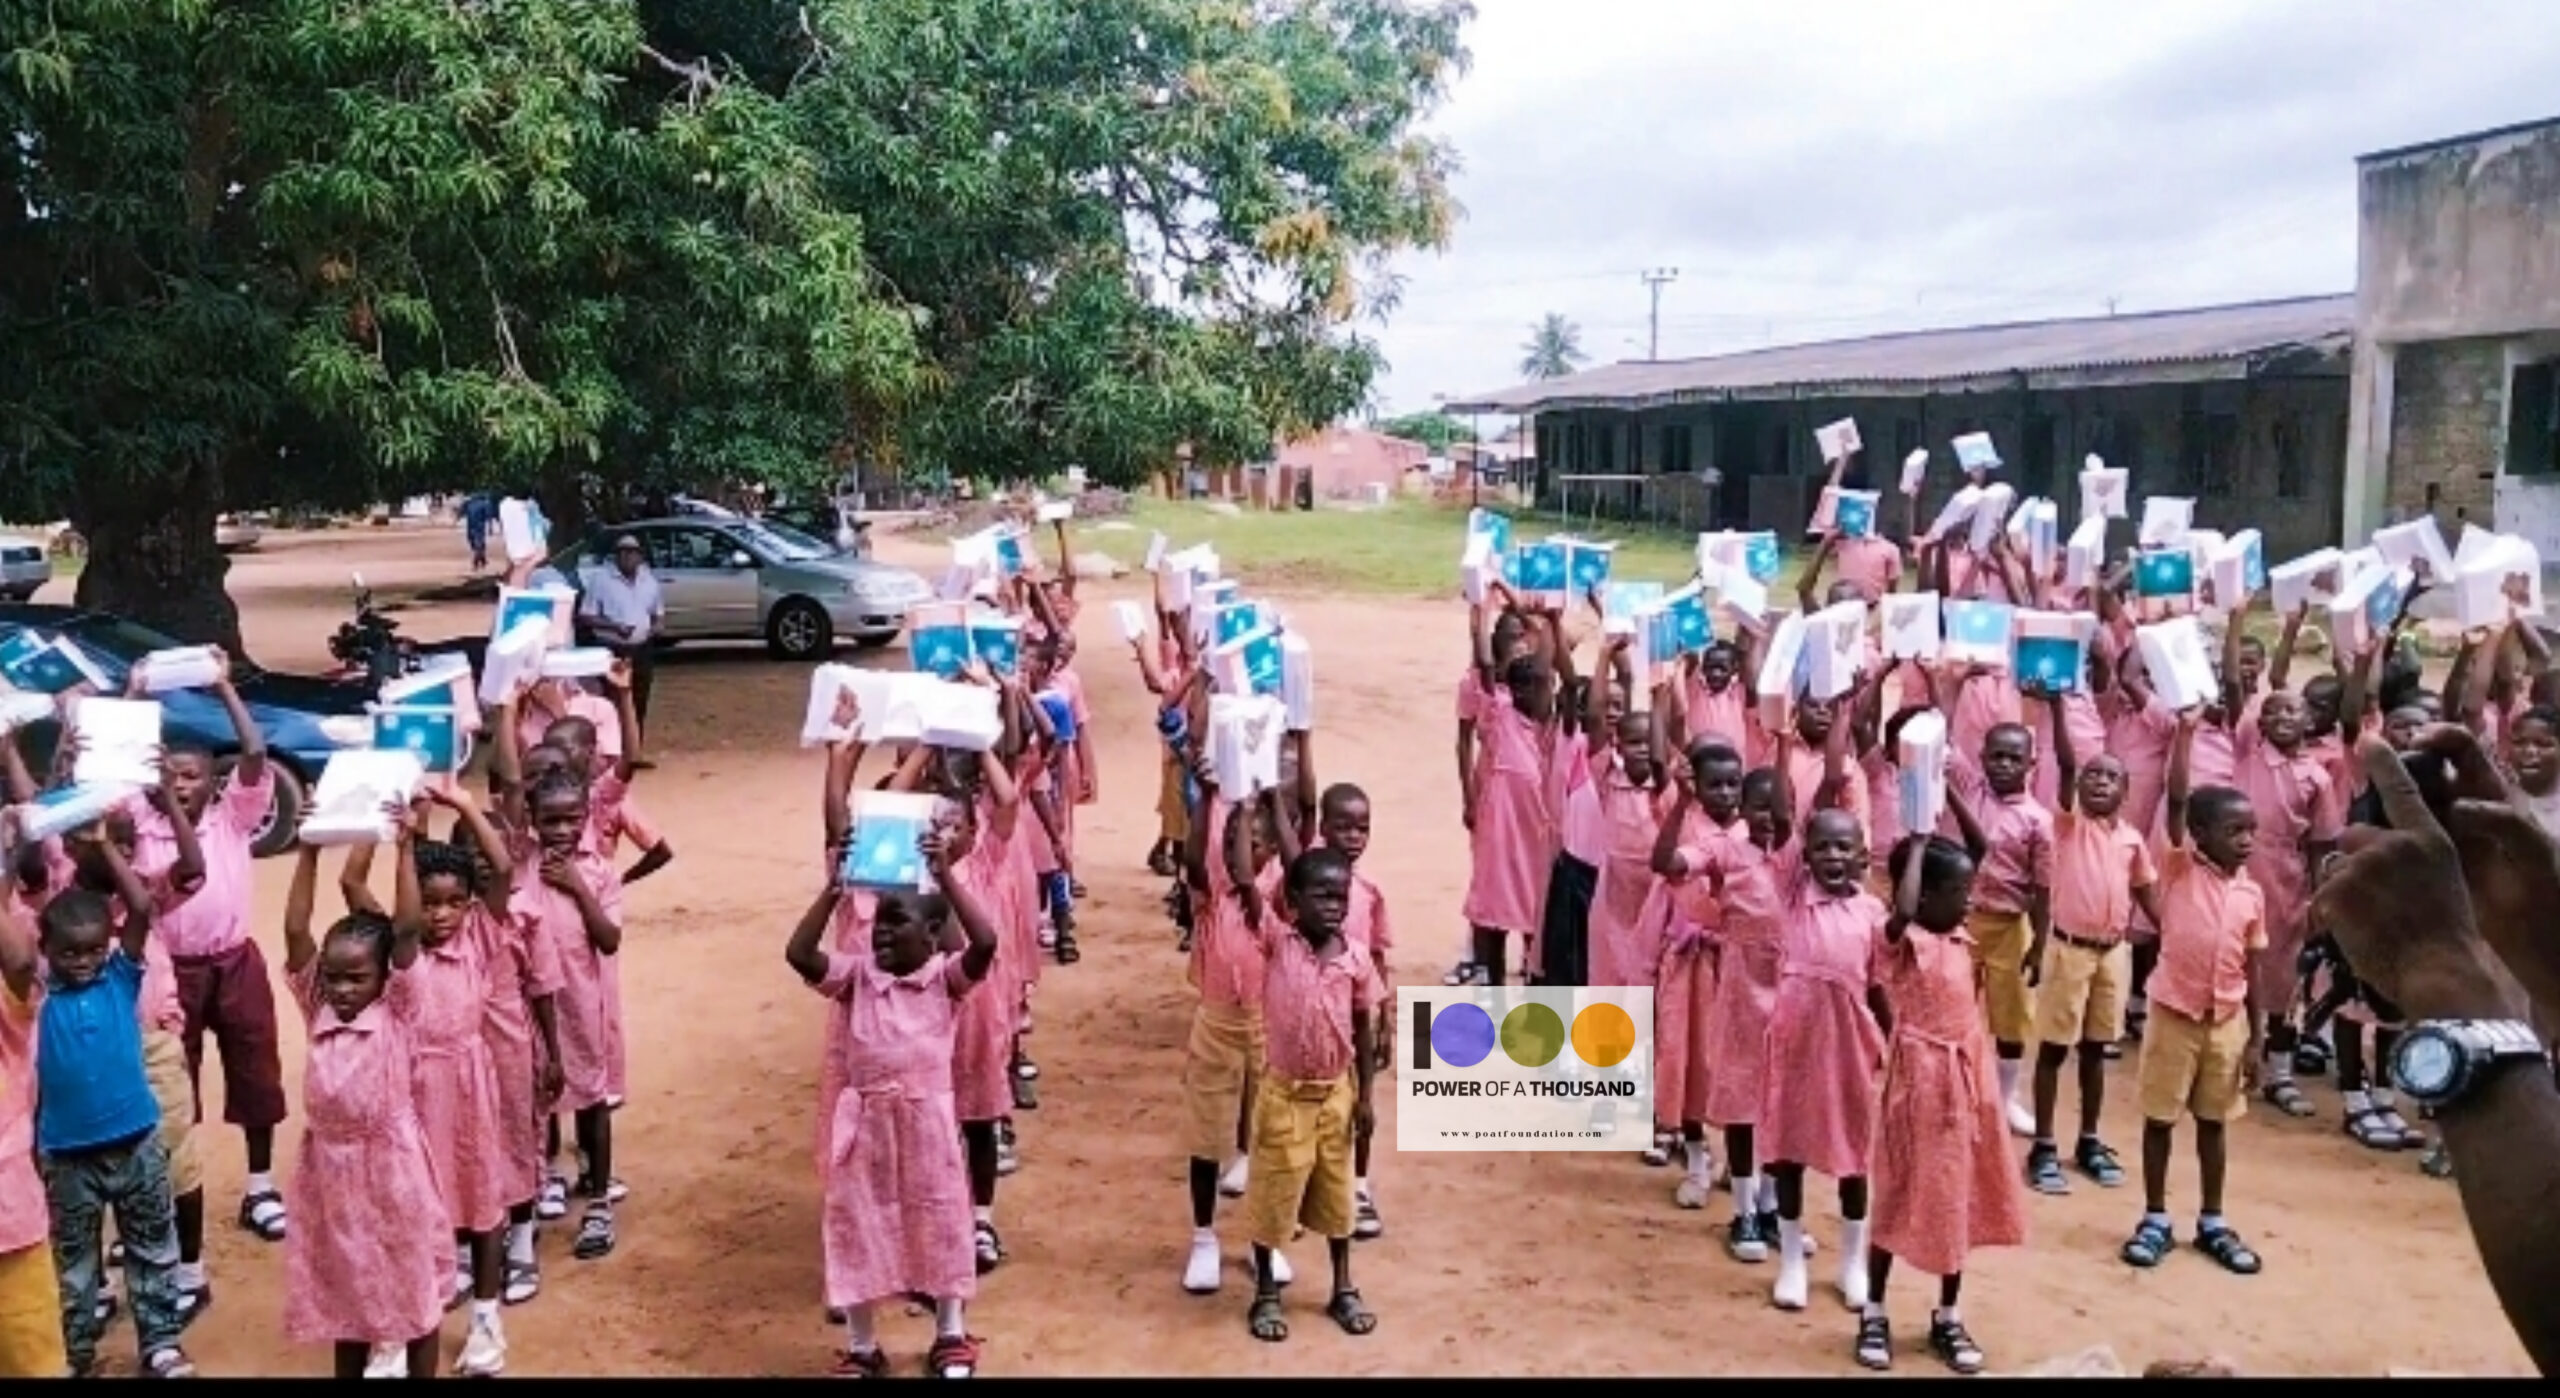 283 Pupils of Baptist Primary School 1, Eruwa Oyo State were given 10 exercise books each for a new term.